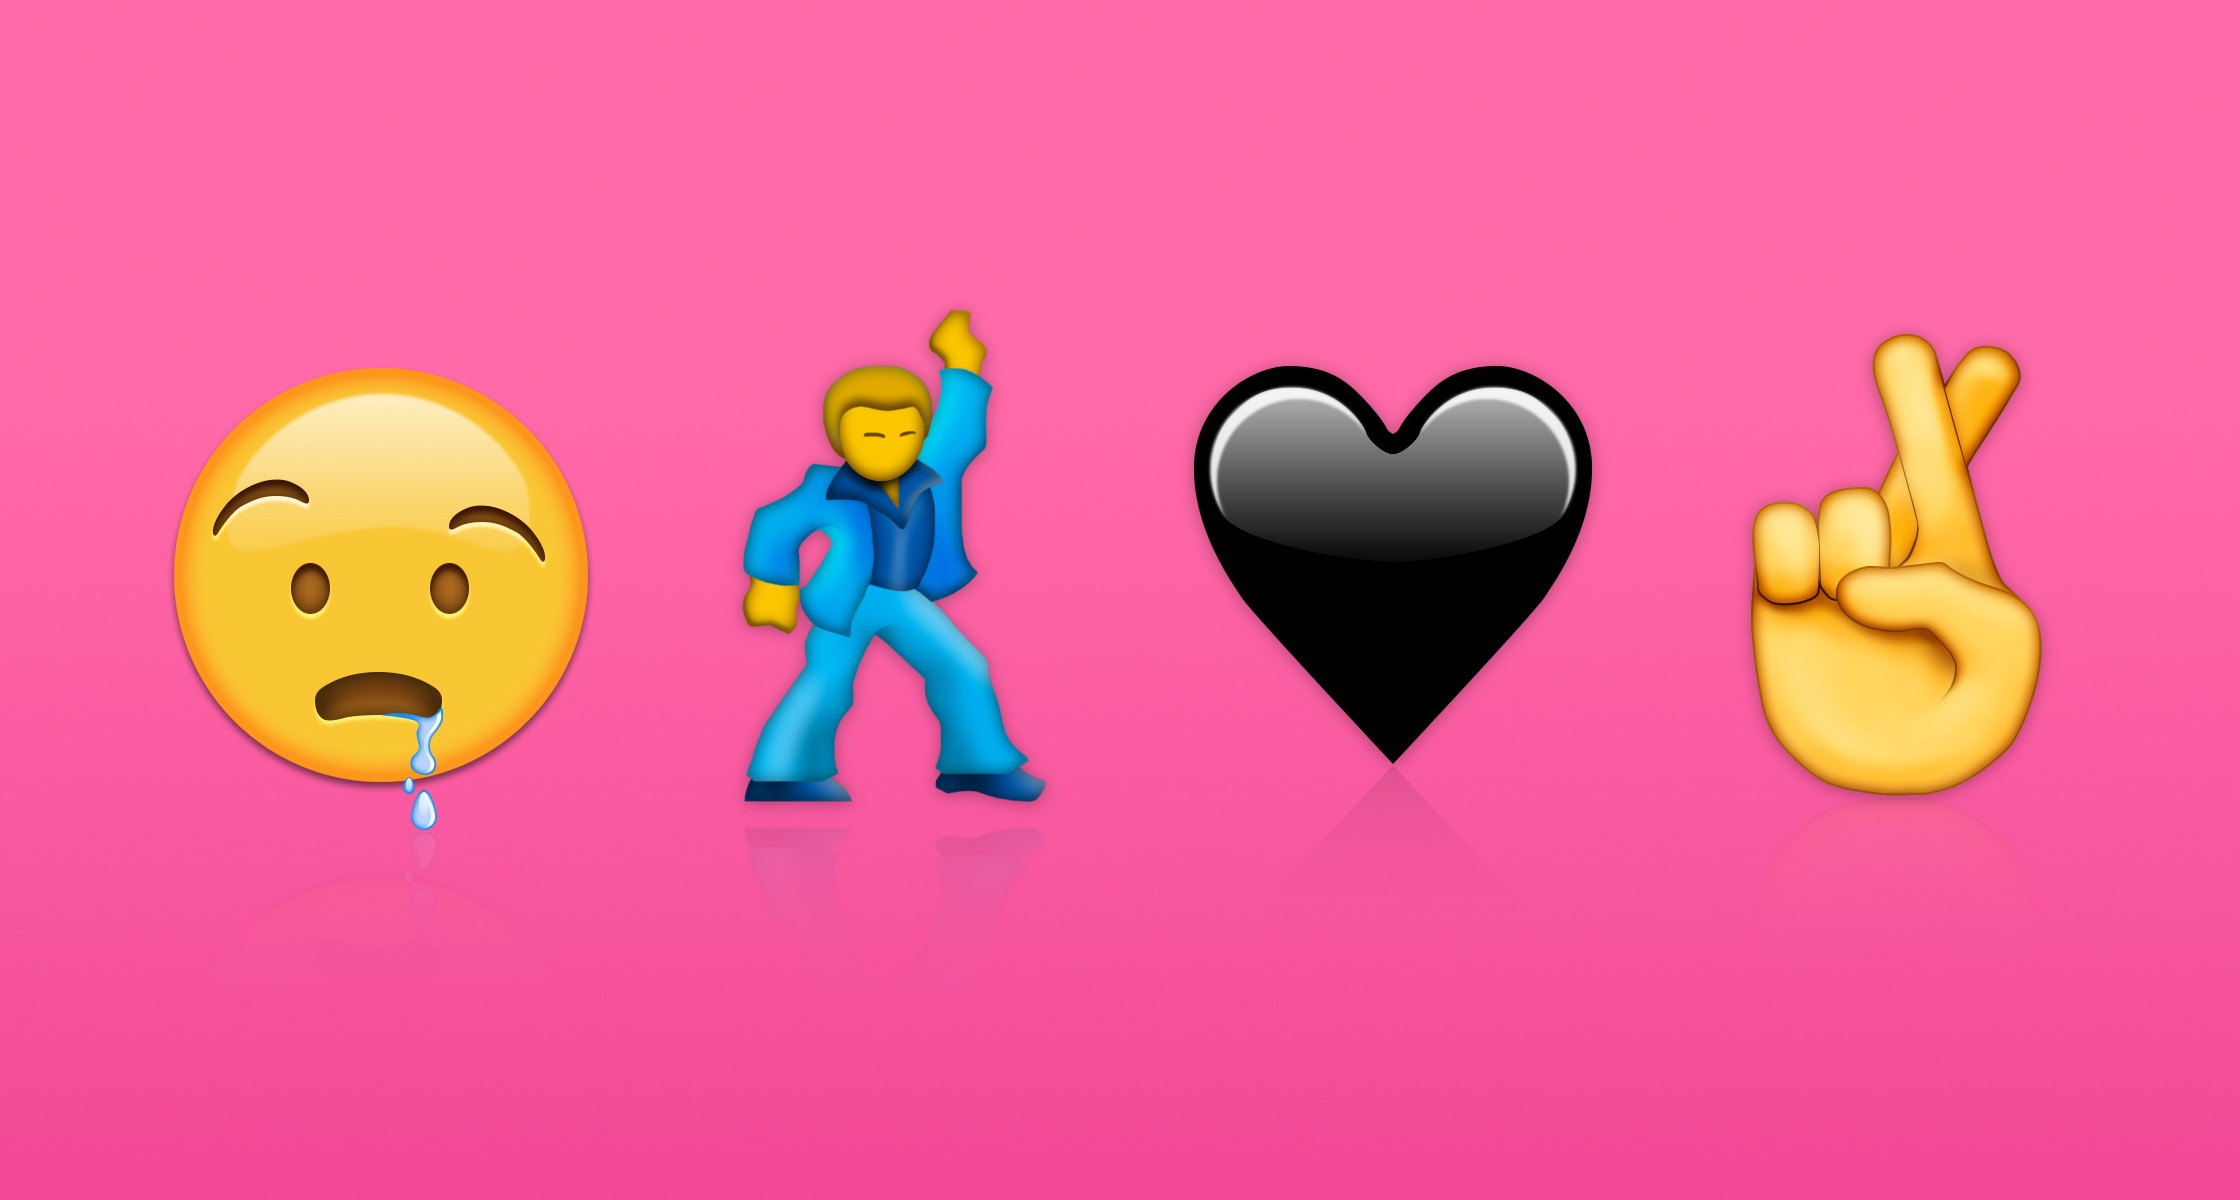 What is a unicode heart?